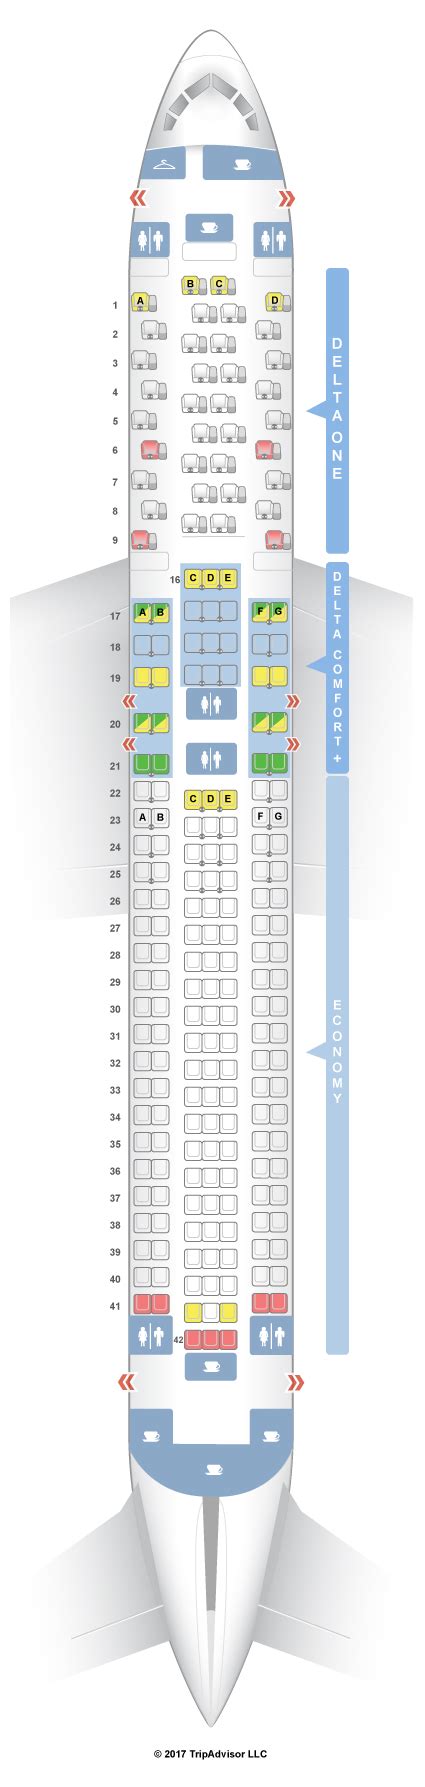 Delta 767-300 seatguru. Booking. My one-way flight on Icelandair from Reykjavik to New York was relatively cheap, at just $209. I used my Chase Sapphire Reserve to pay for it, which let me earn 3x points — or in this case, 627 Ultimate Reward points, worth about $14, according to TPG's most recent valuations — for the travel purchase. 